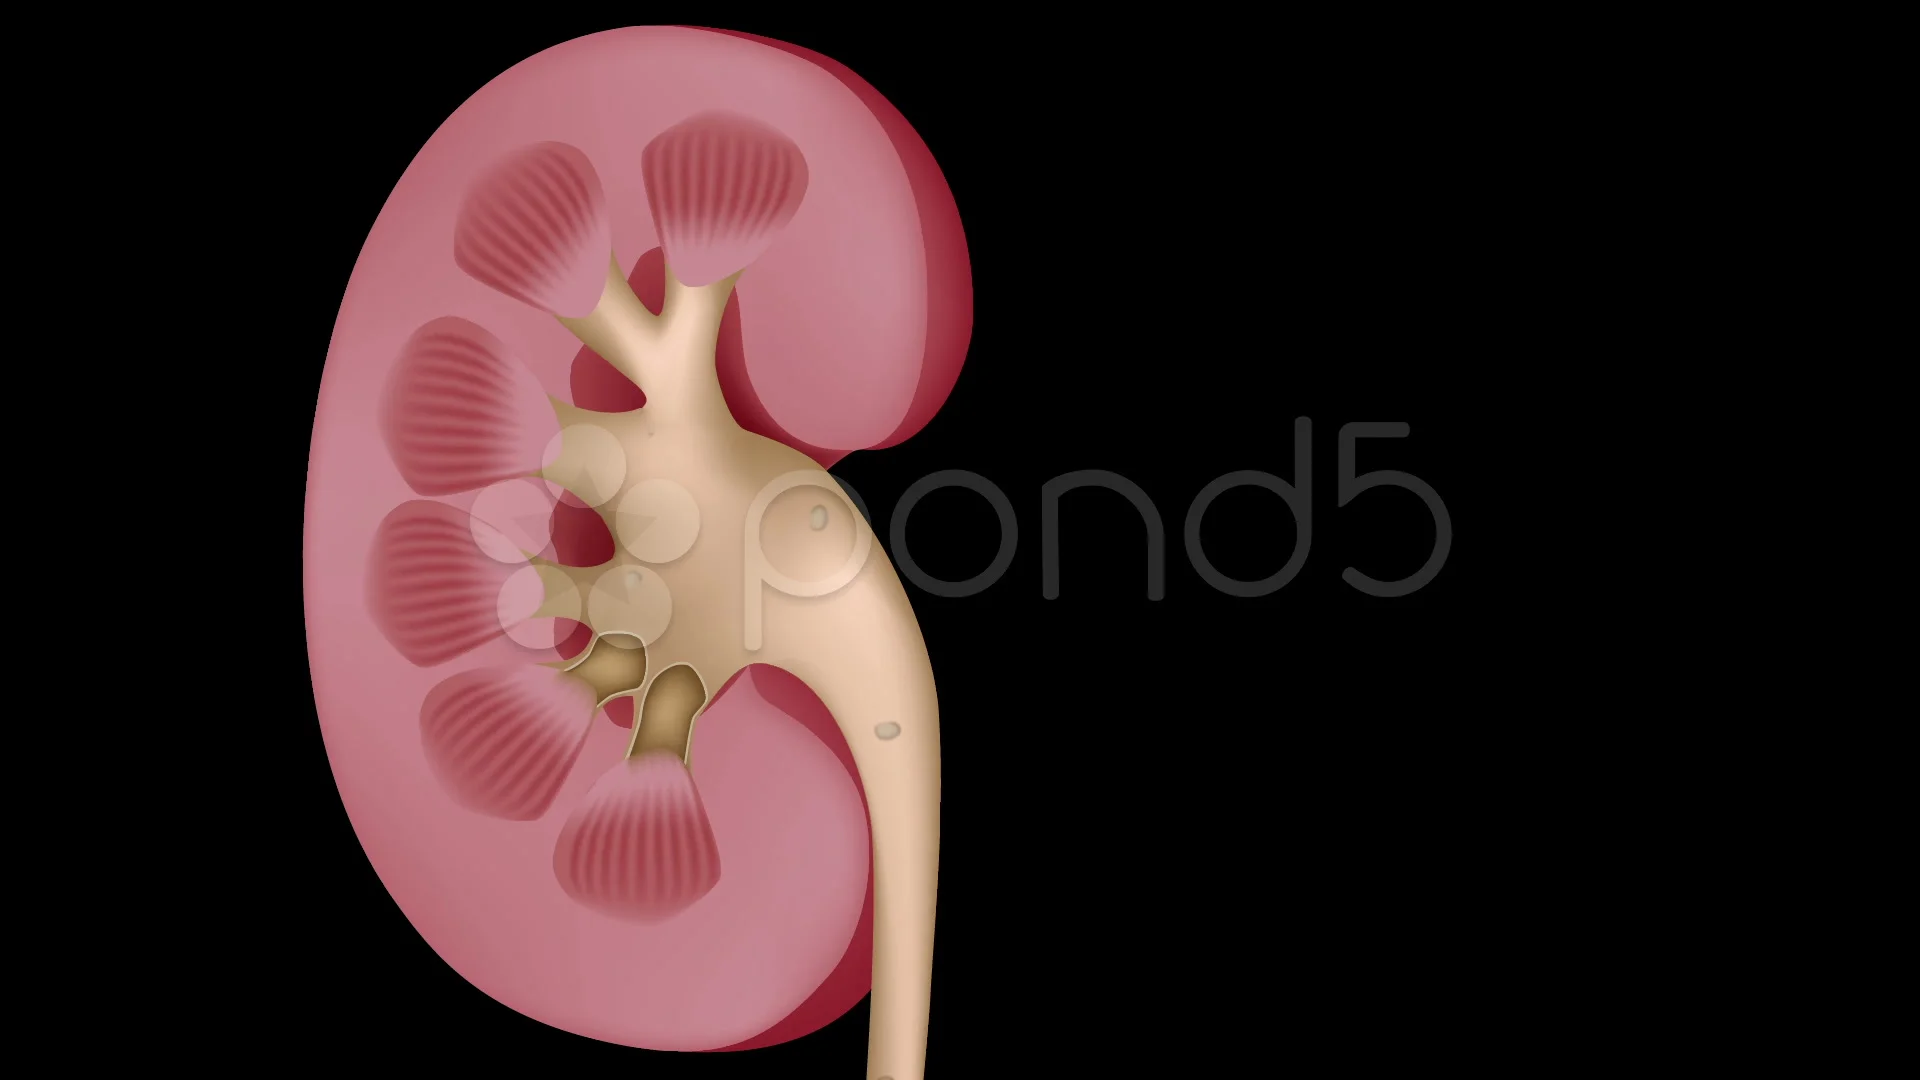 Kidney stones disease and treatment | Stock Video | Pond5